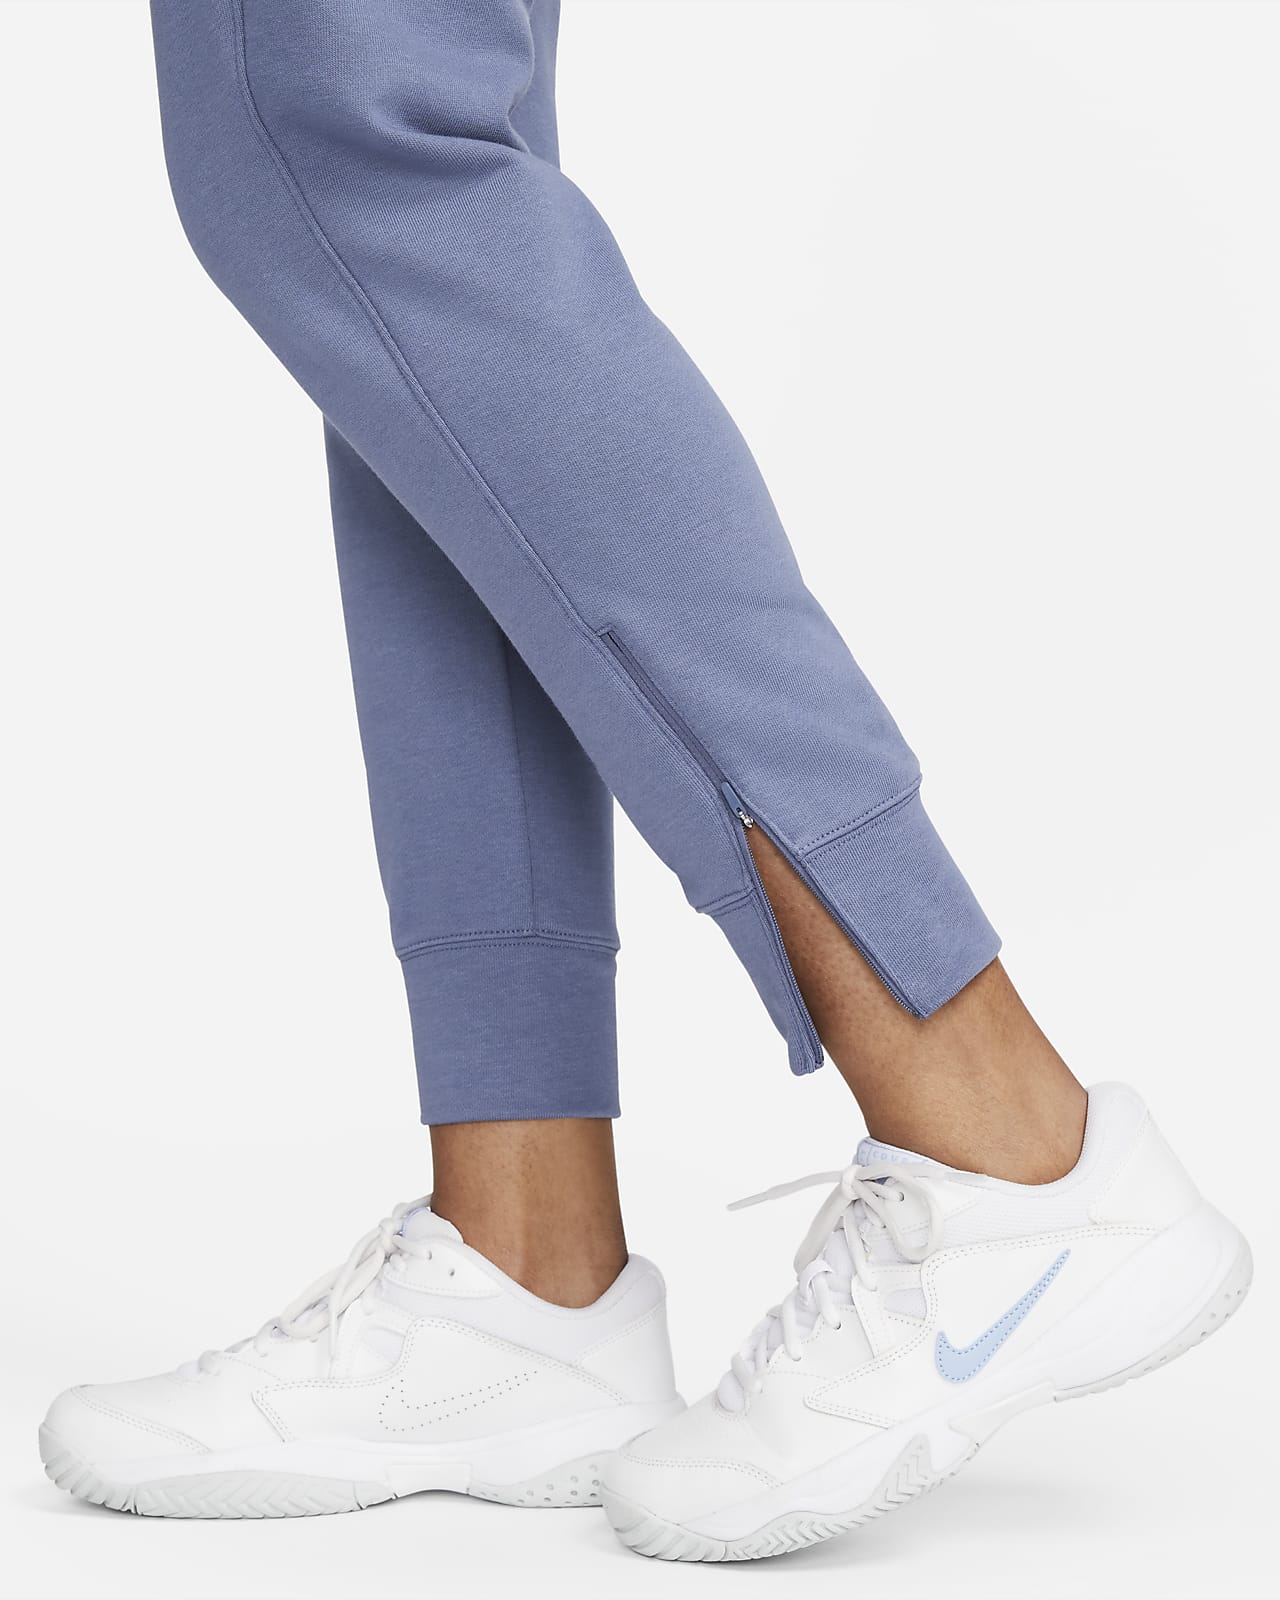 NikeCourt Heritage Men's French Terry Tennis Trousers. Nike IE